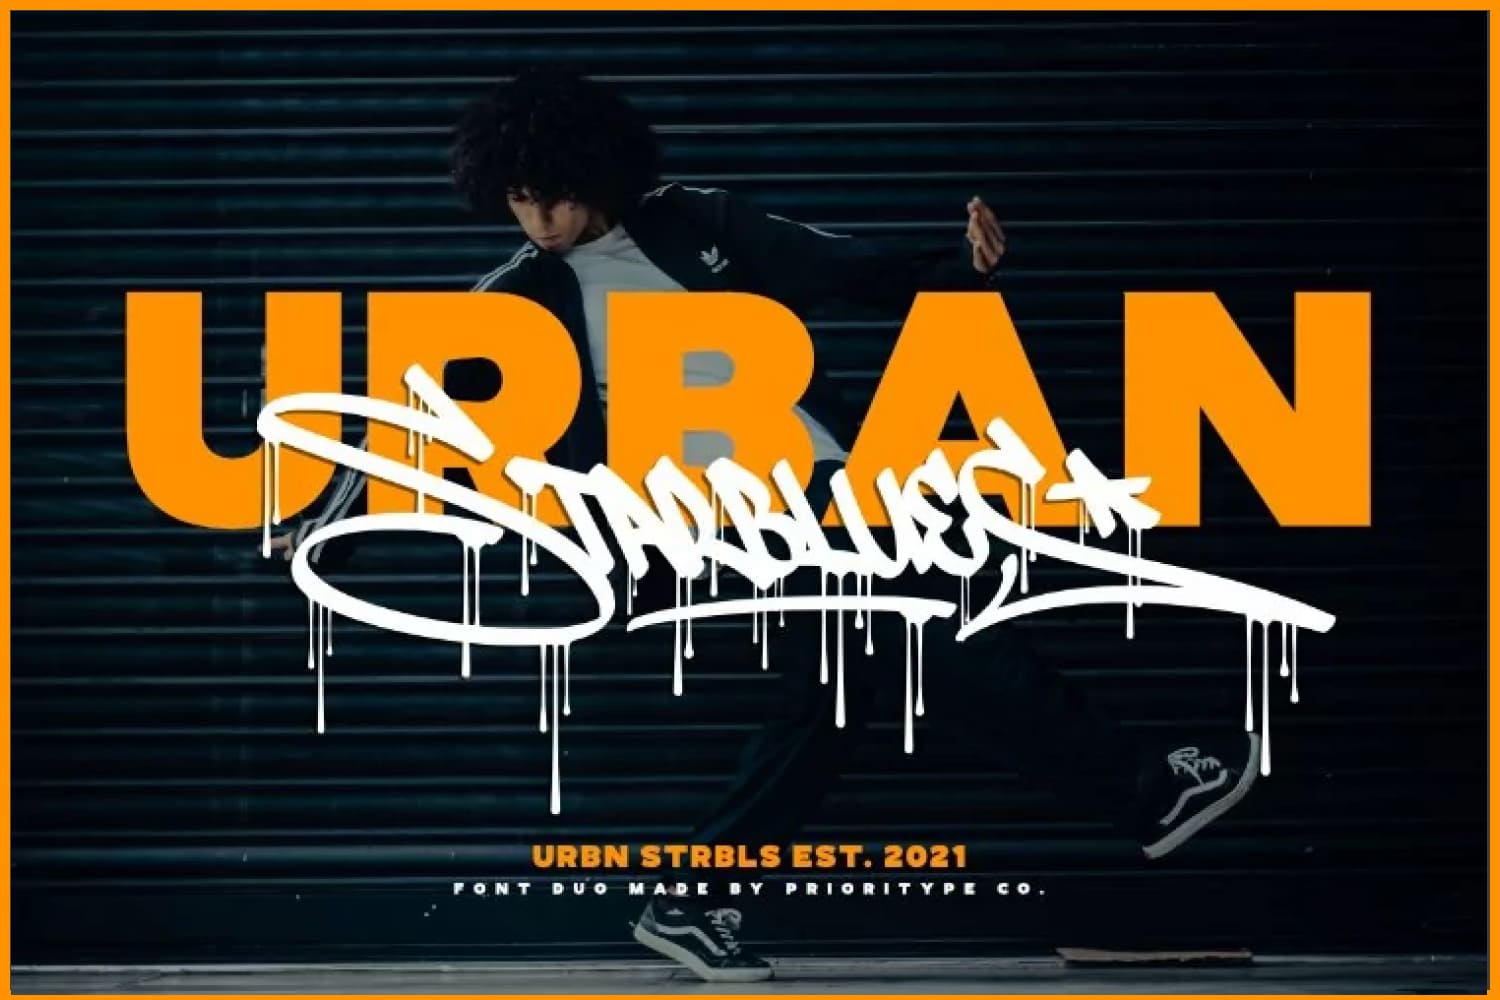 Yellow text in bold type and white text in graffiti style on a dark background.